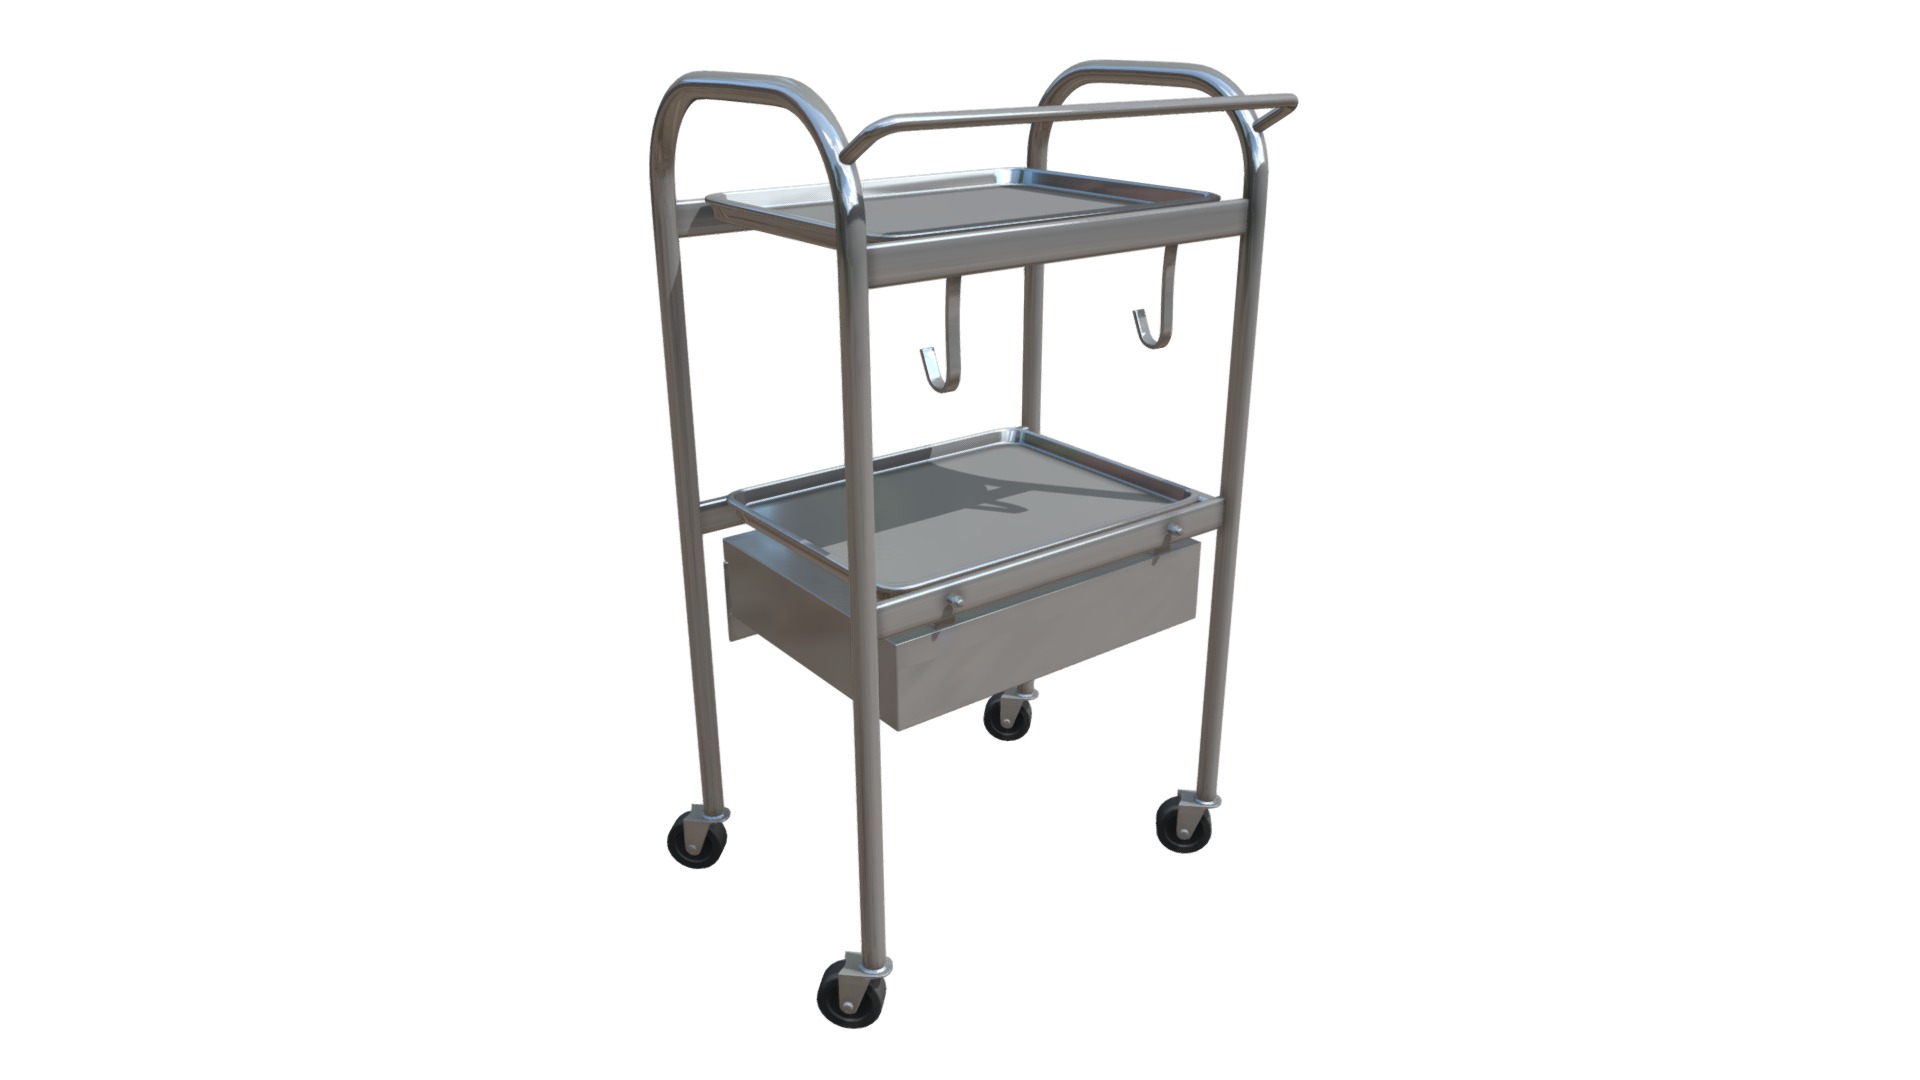 3D model Medical Equipment - This is a 3D model of the Medical Equipment. The 3D model is about a shopping cart with wheels.